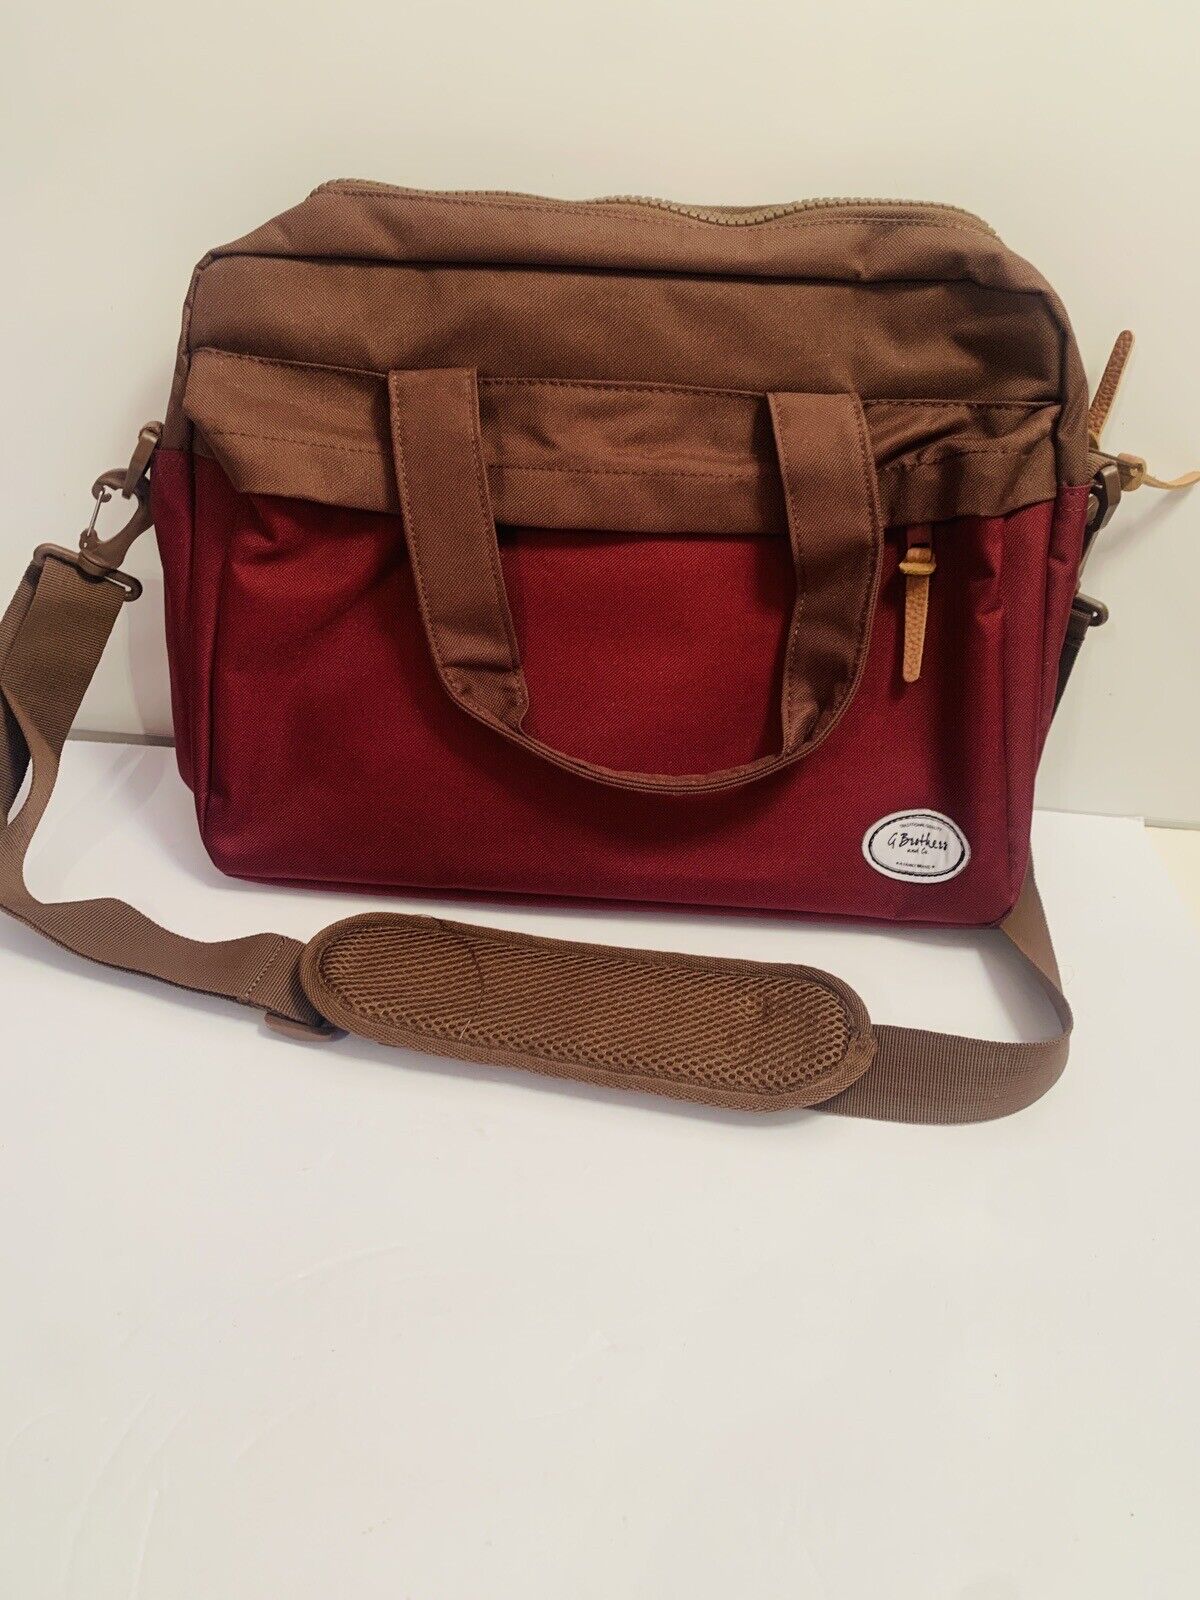 G. Brothers And Co. Laptop Bag Maroon And Brown/NWOT